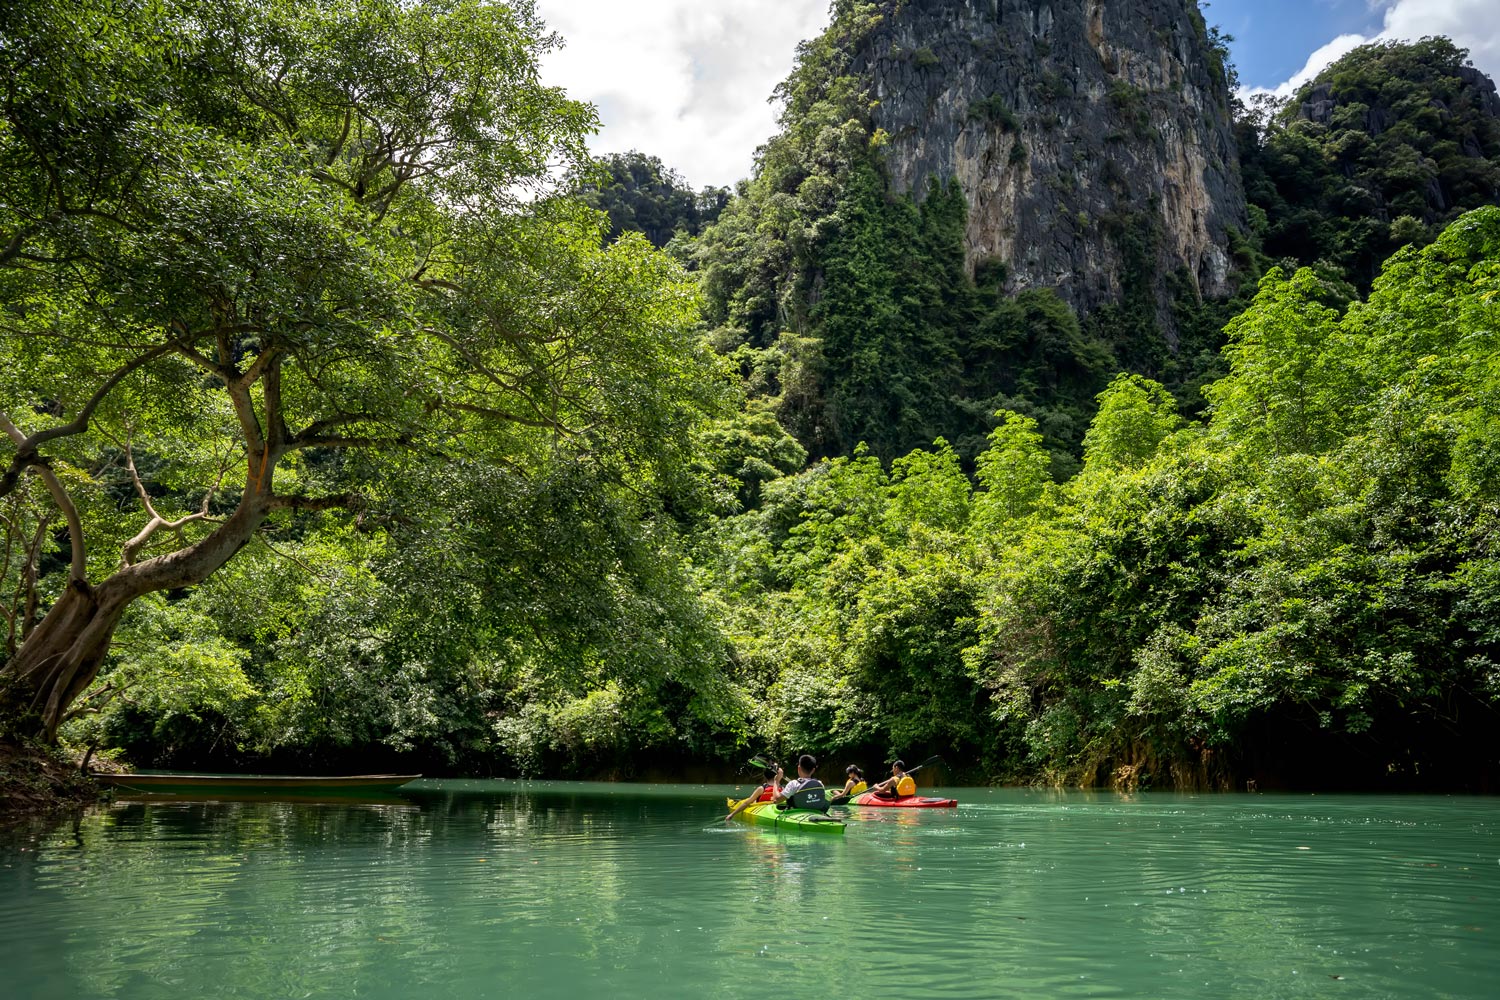 Kayaking is a wonderful way to connect with nature, as well as an exciting and adventurous activity.